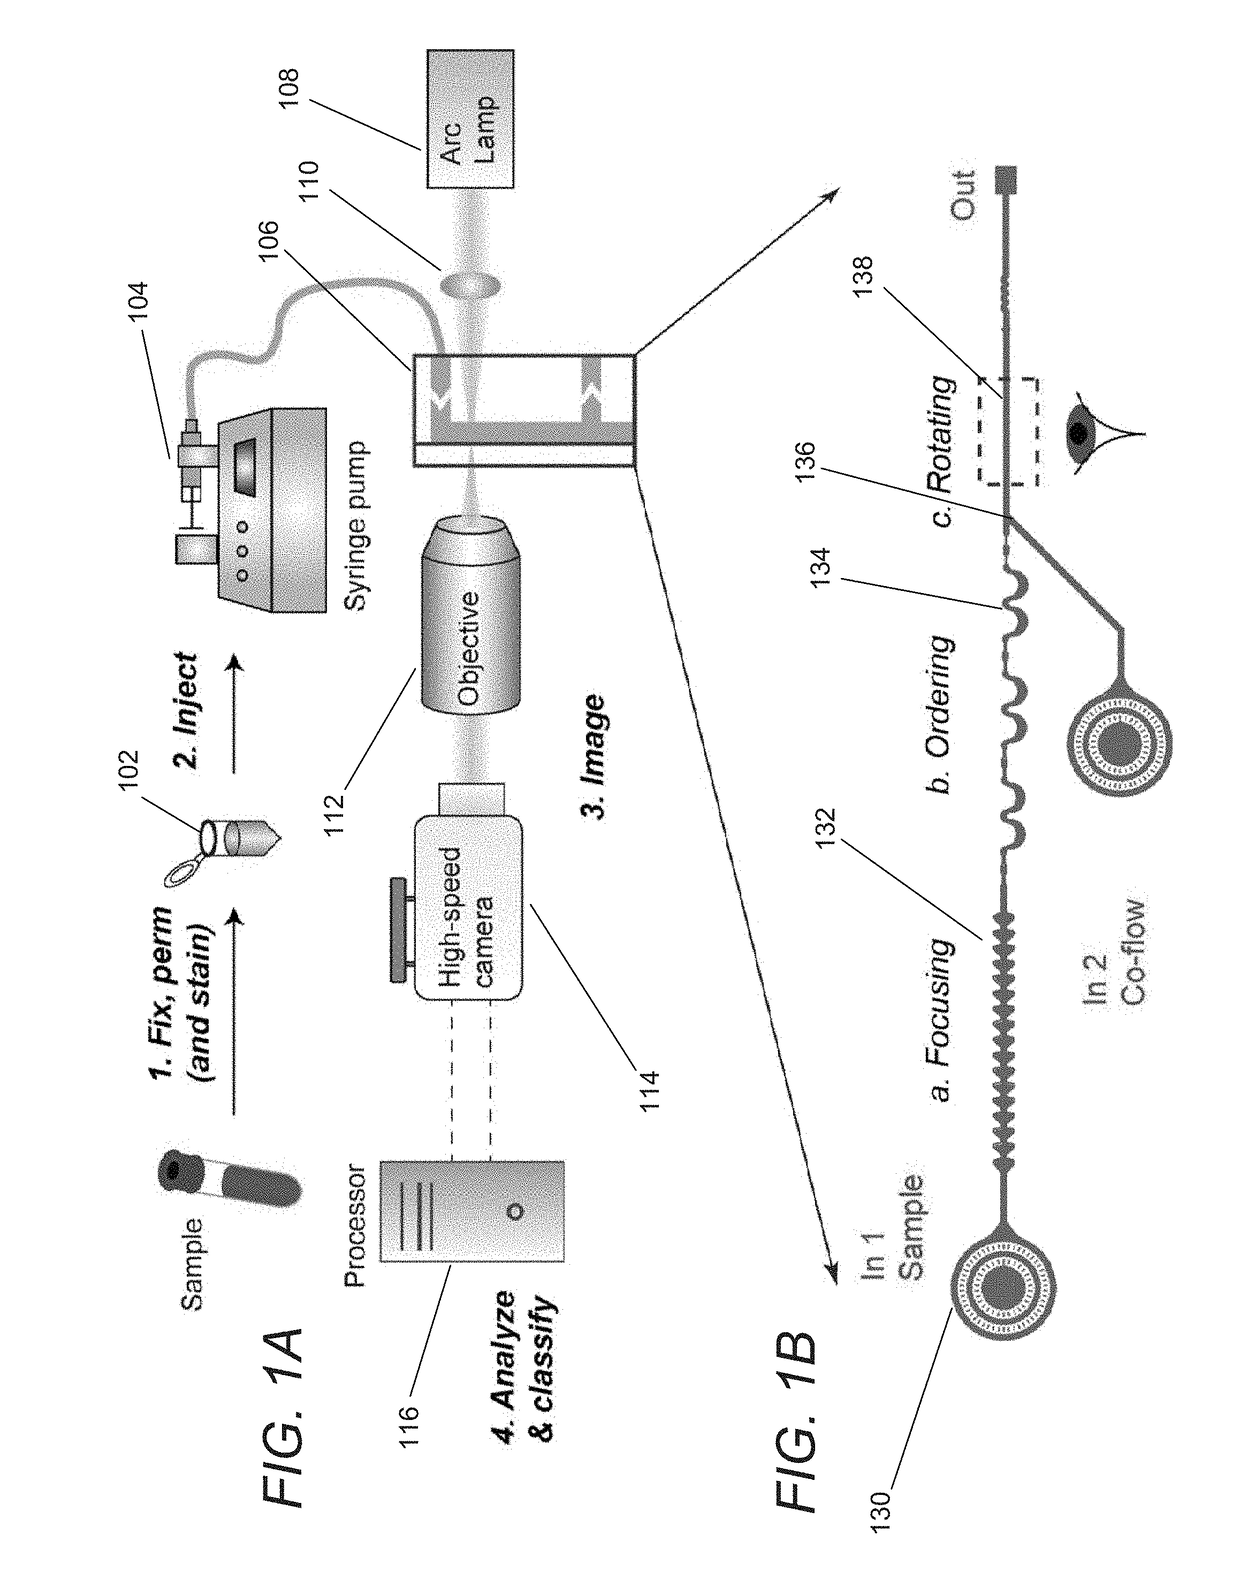 Systems and Methods for Automated Single Cell Cytological Classification in Flow